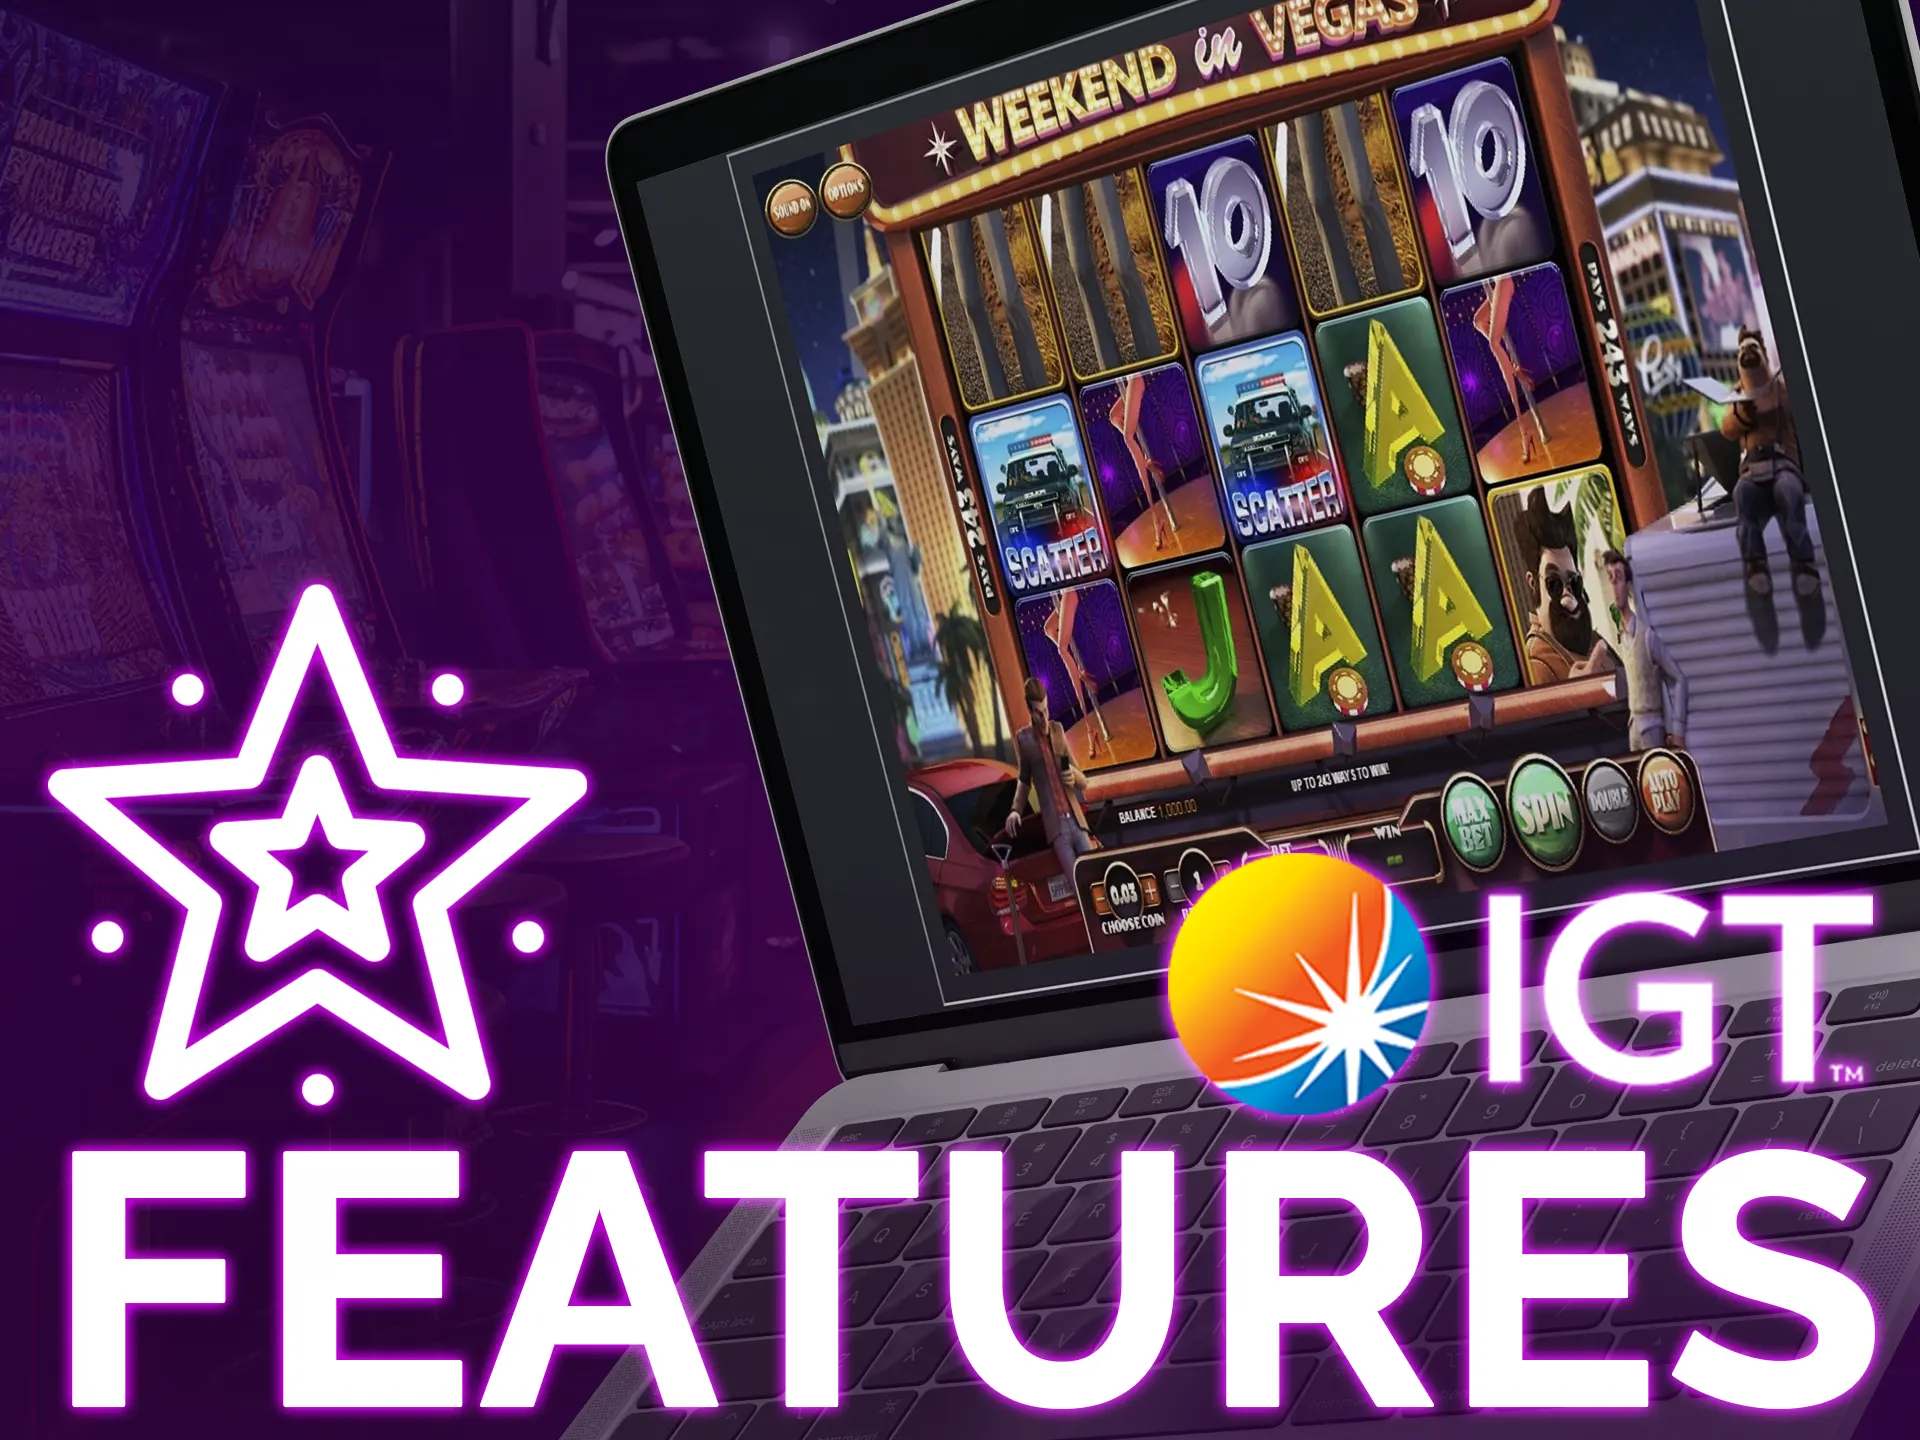 Learn more features for IGT slot games.